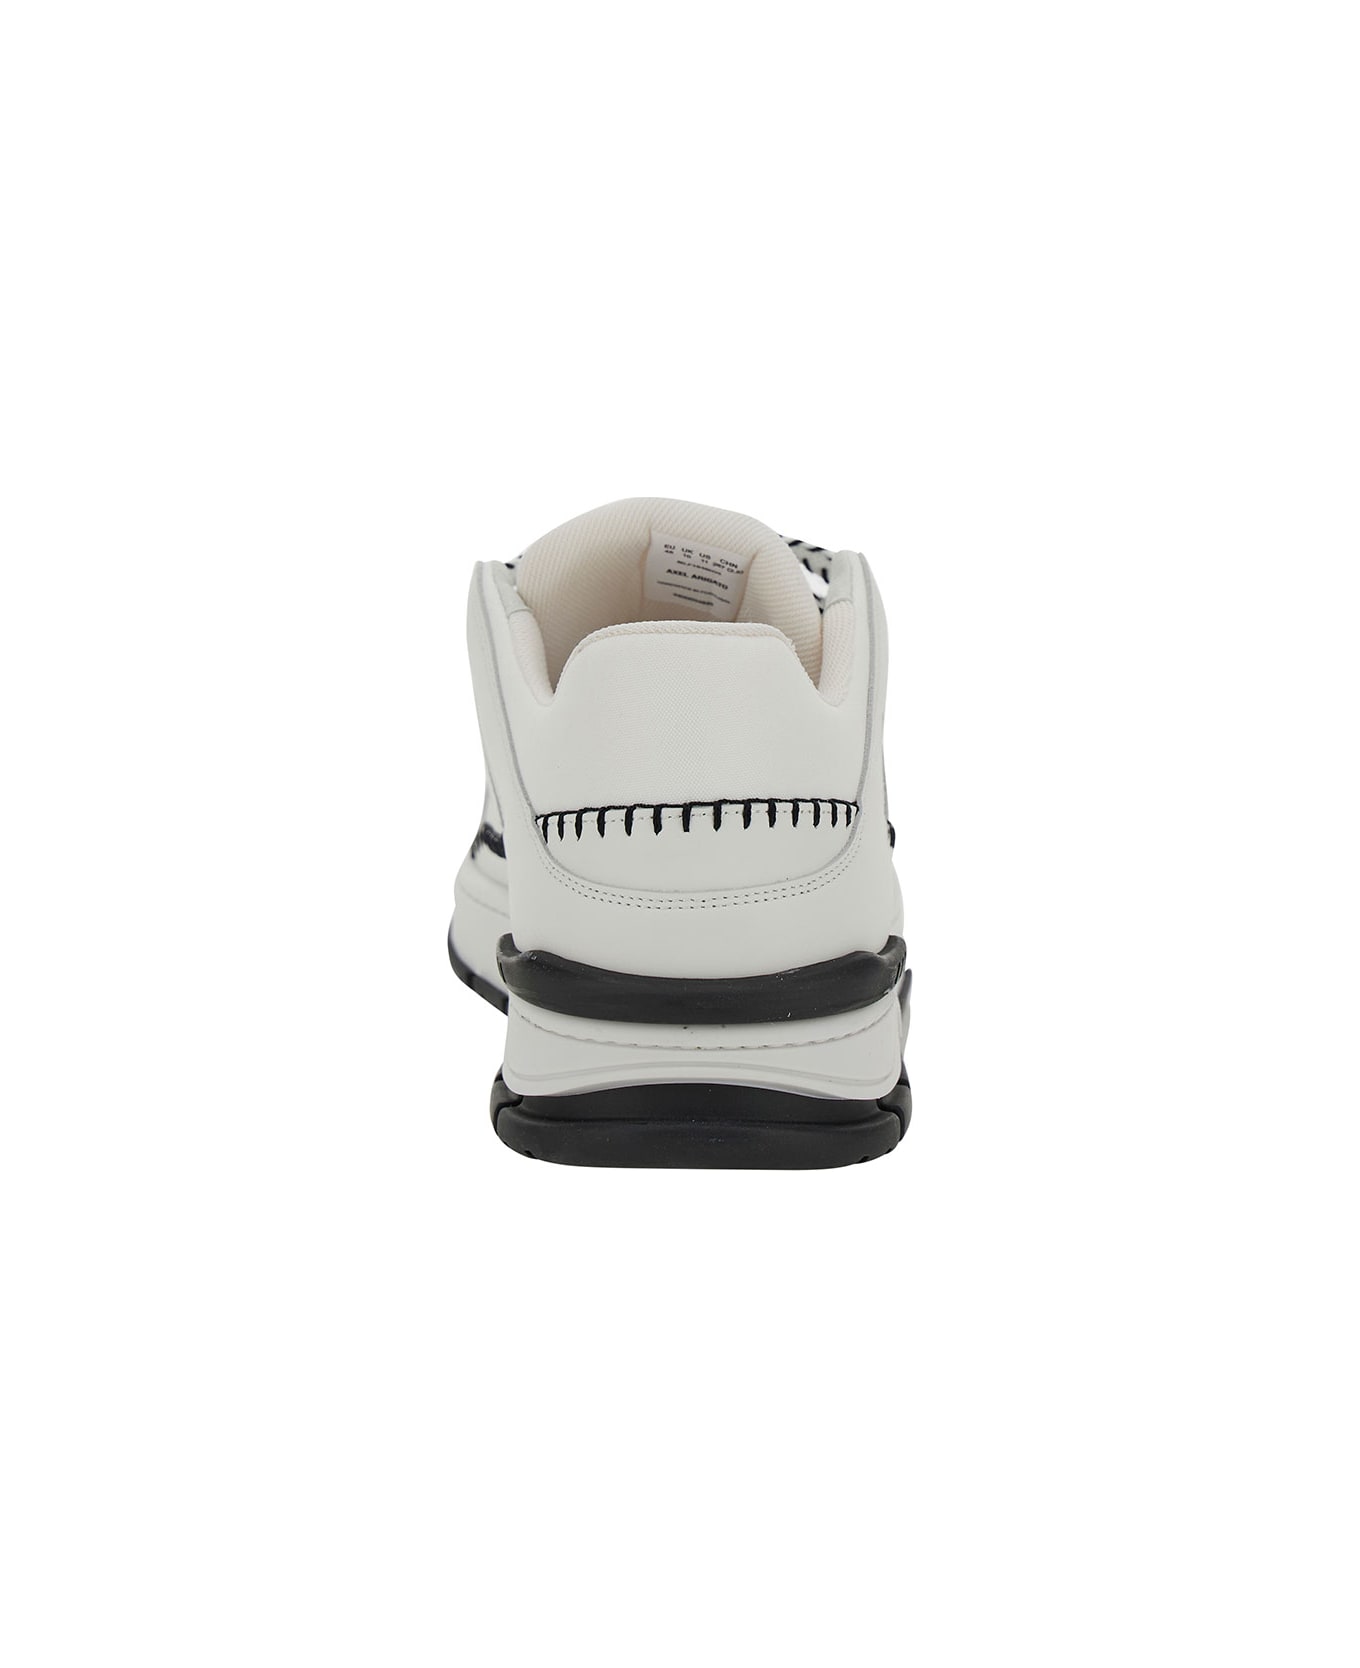 Axel Arigato 'area Lo Sneaker Stitch' White Low Top Sneakers With Contrasting Stitch Detail In Leather Man - White Black